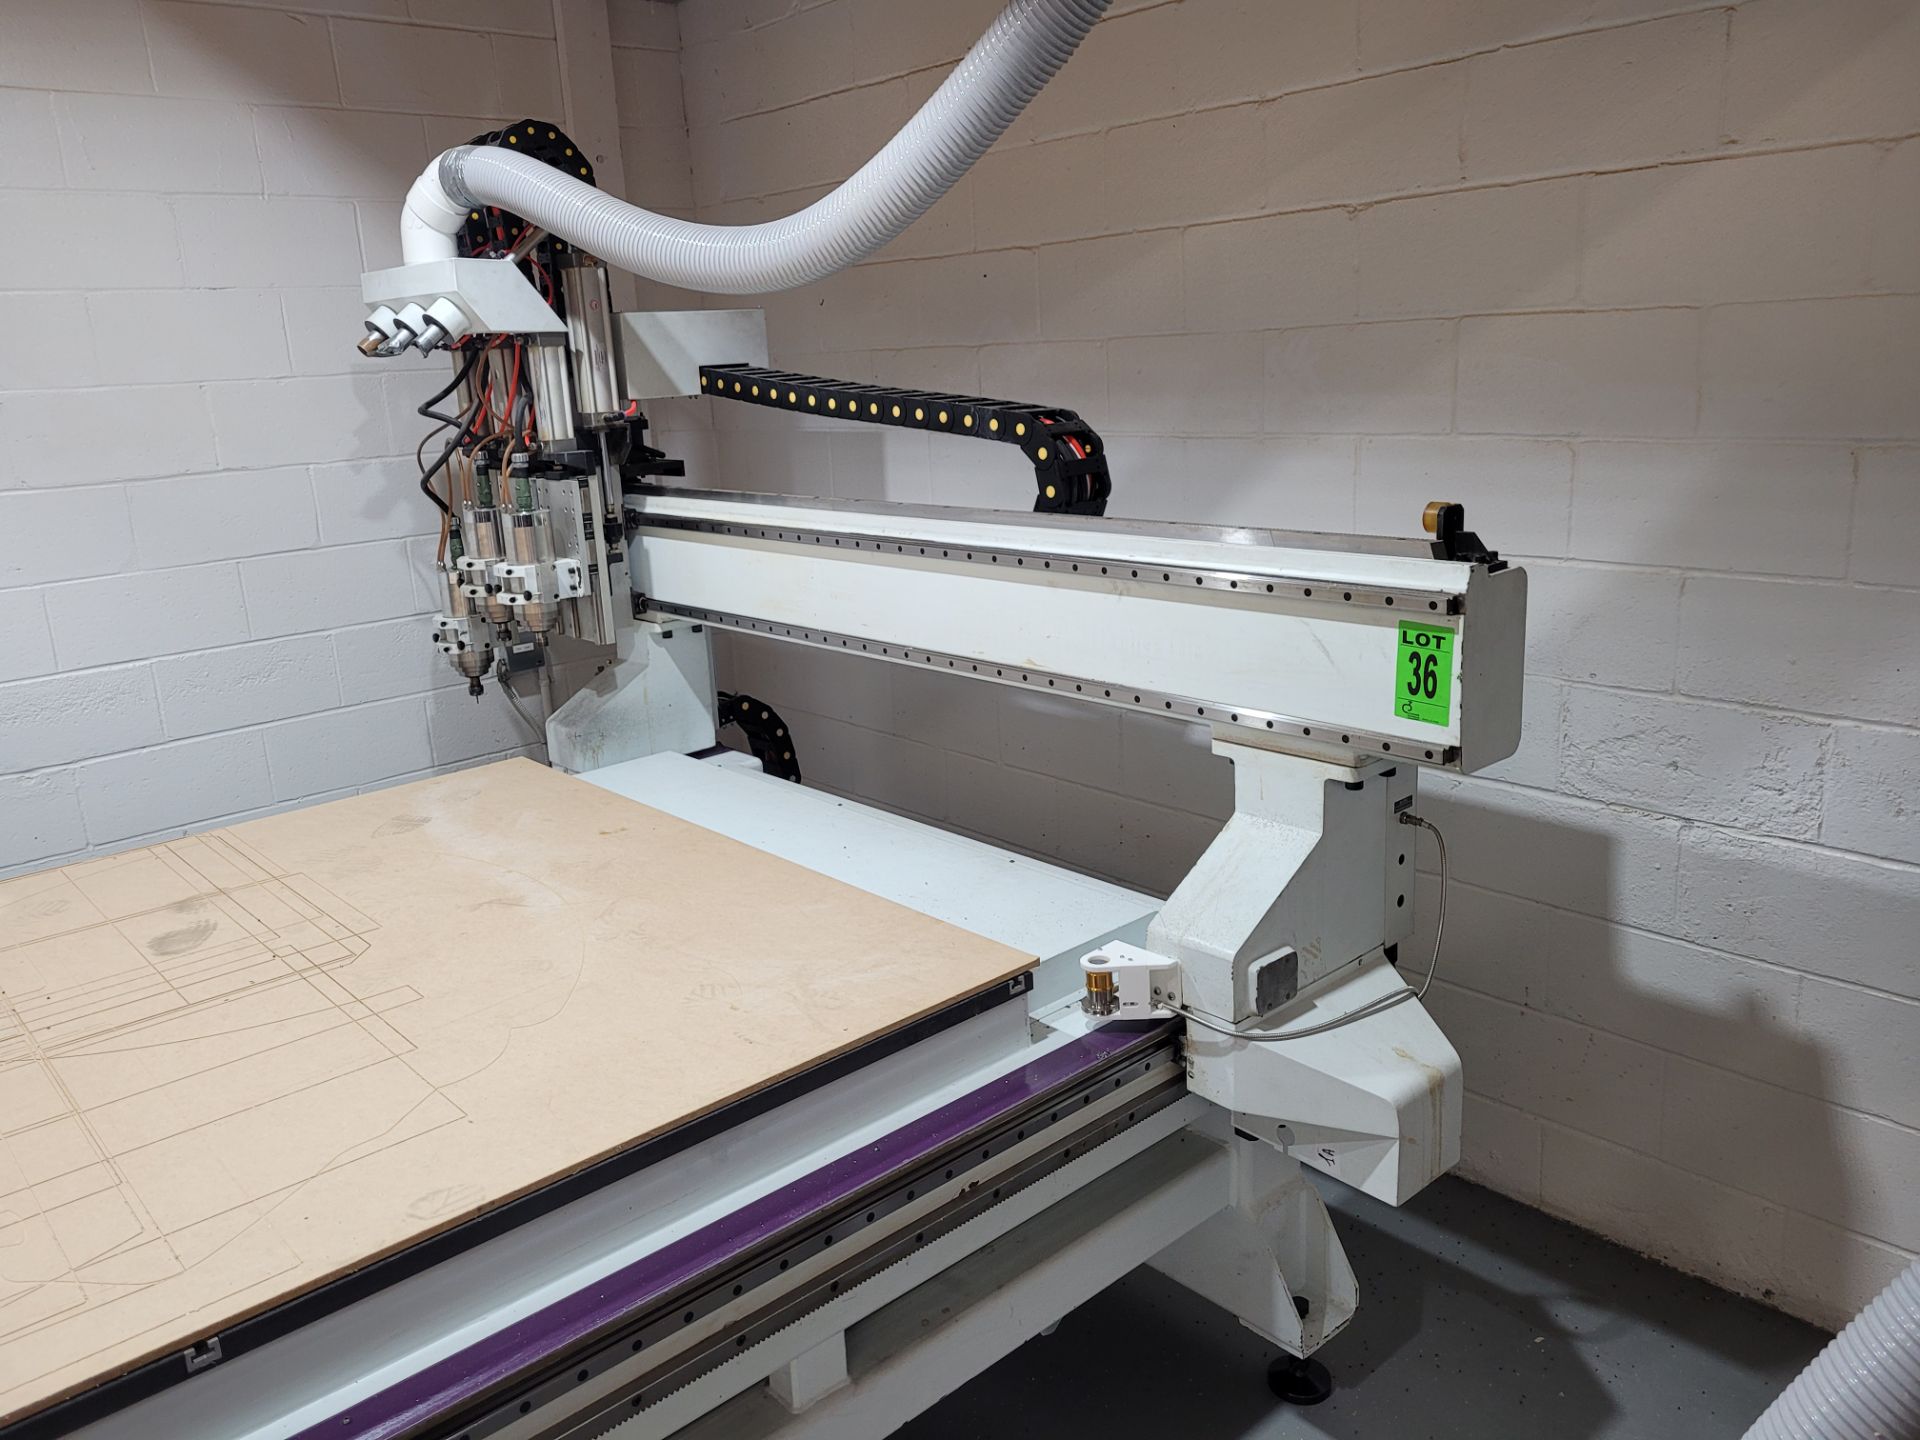 2015 SUDA ATC CNC Router mod. MG1630C, 3-Head System with Accessories and CRAFTEX mod. FM-300 Collec - Image 21 of 51